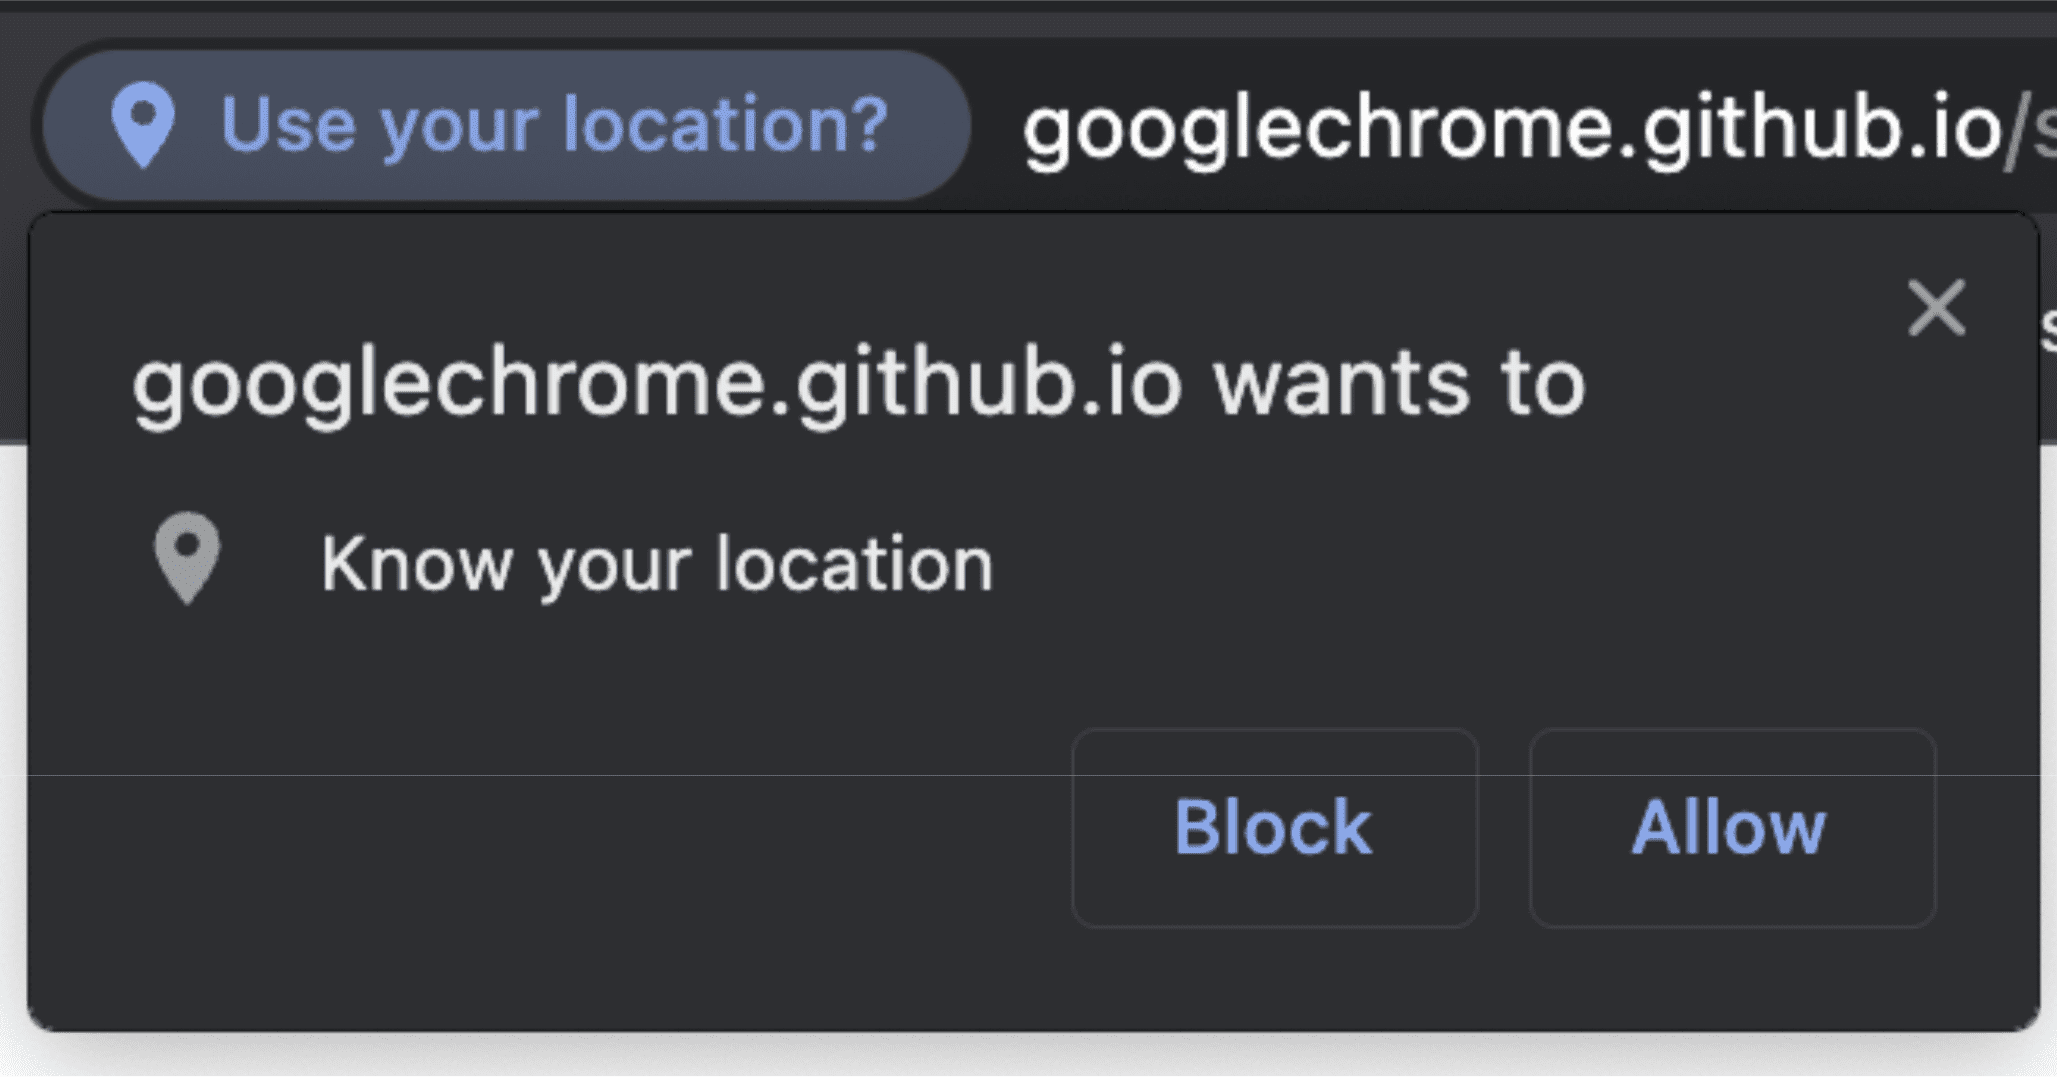 A screenshot of the permission prompt you see when a website requests access to the geolocation api